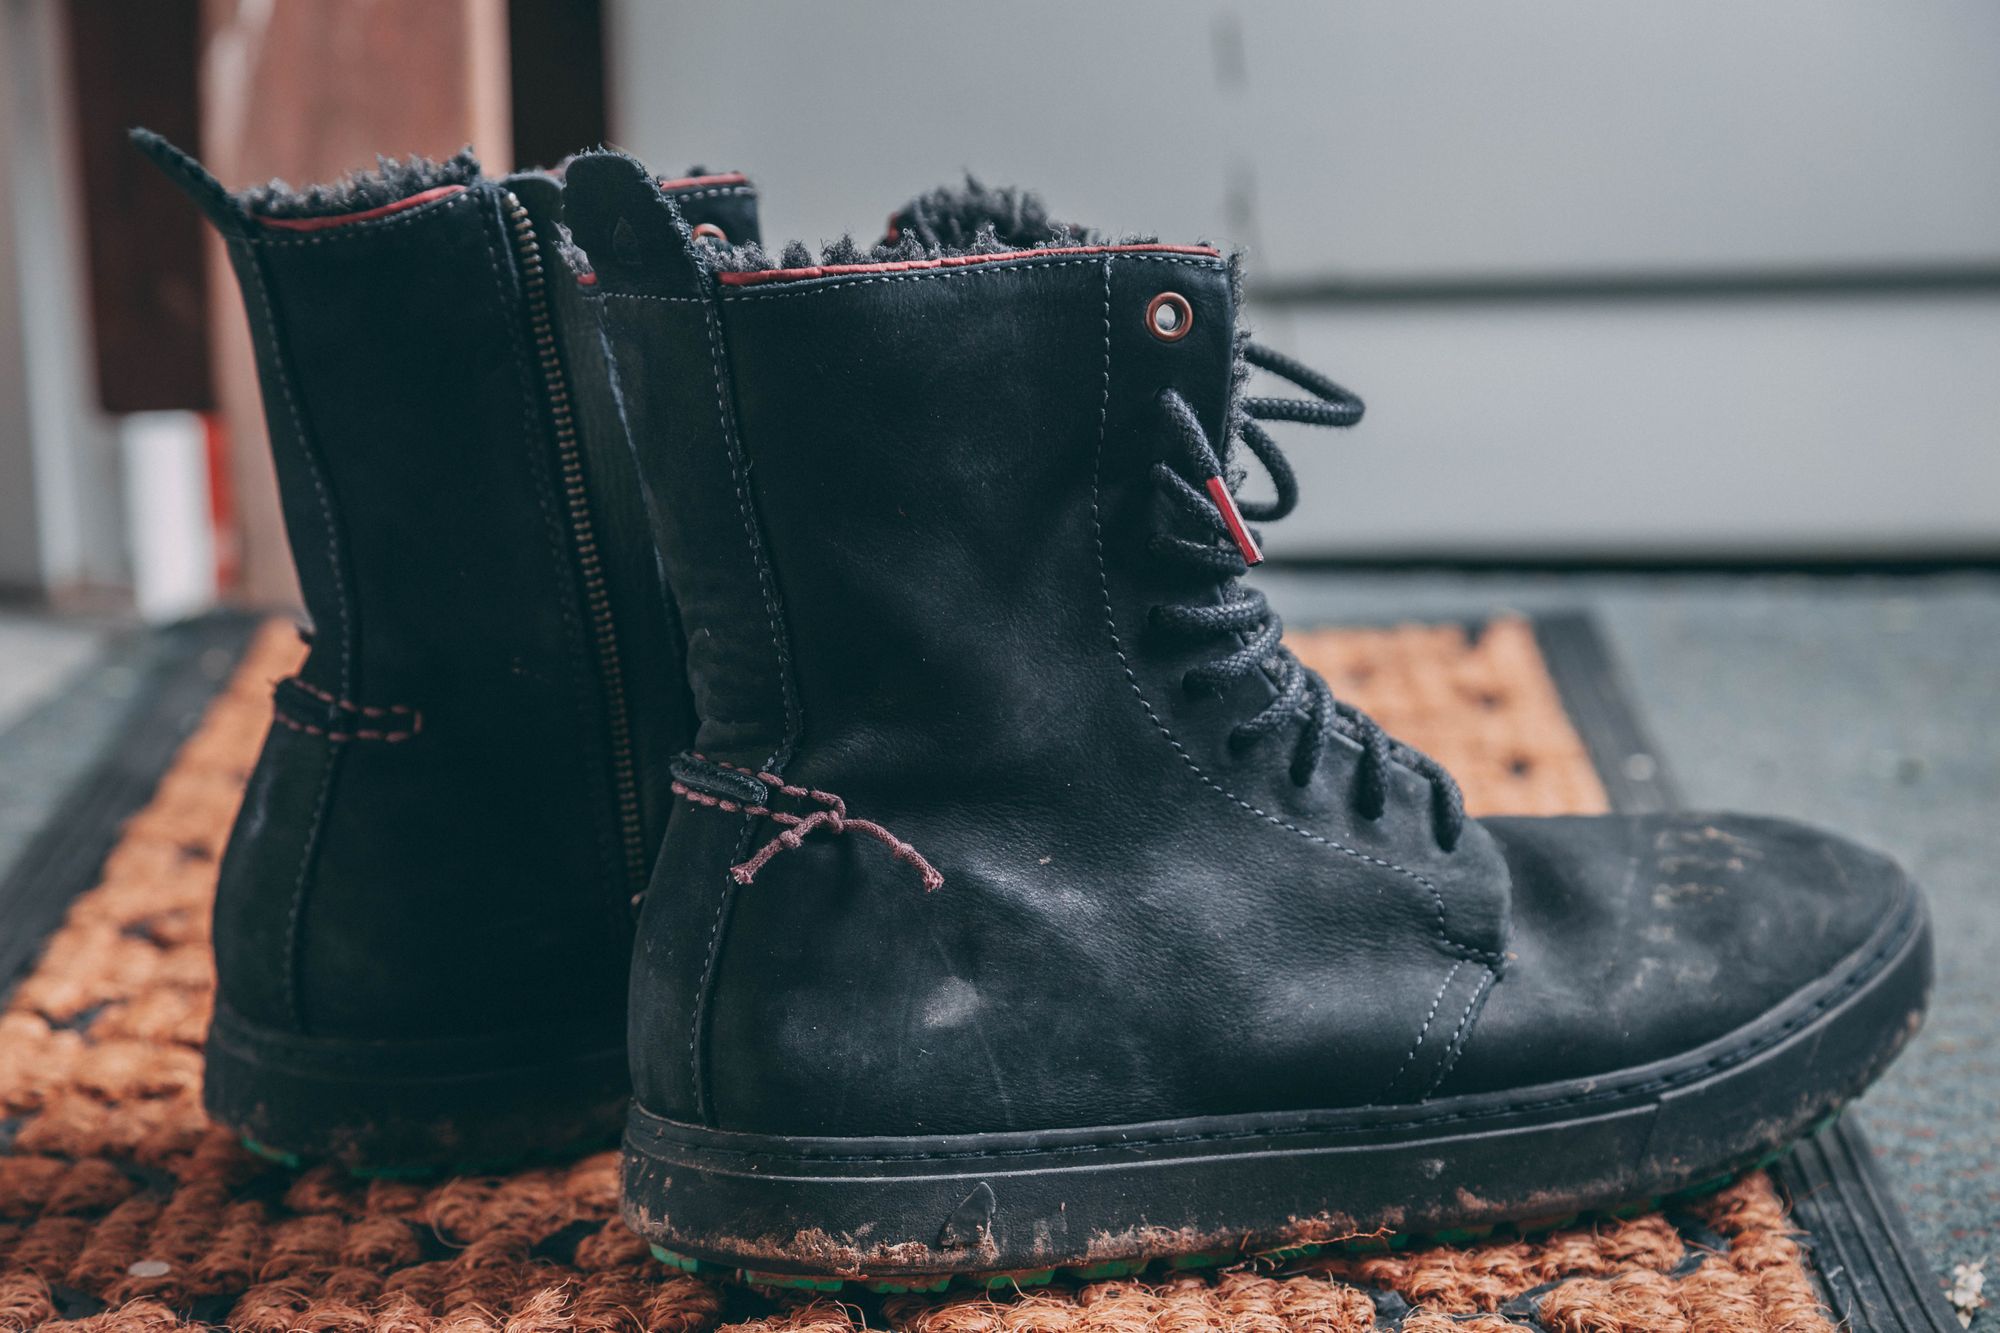 How to Clean Suede Boots